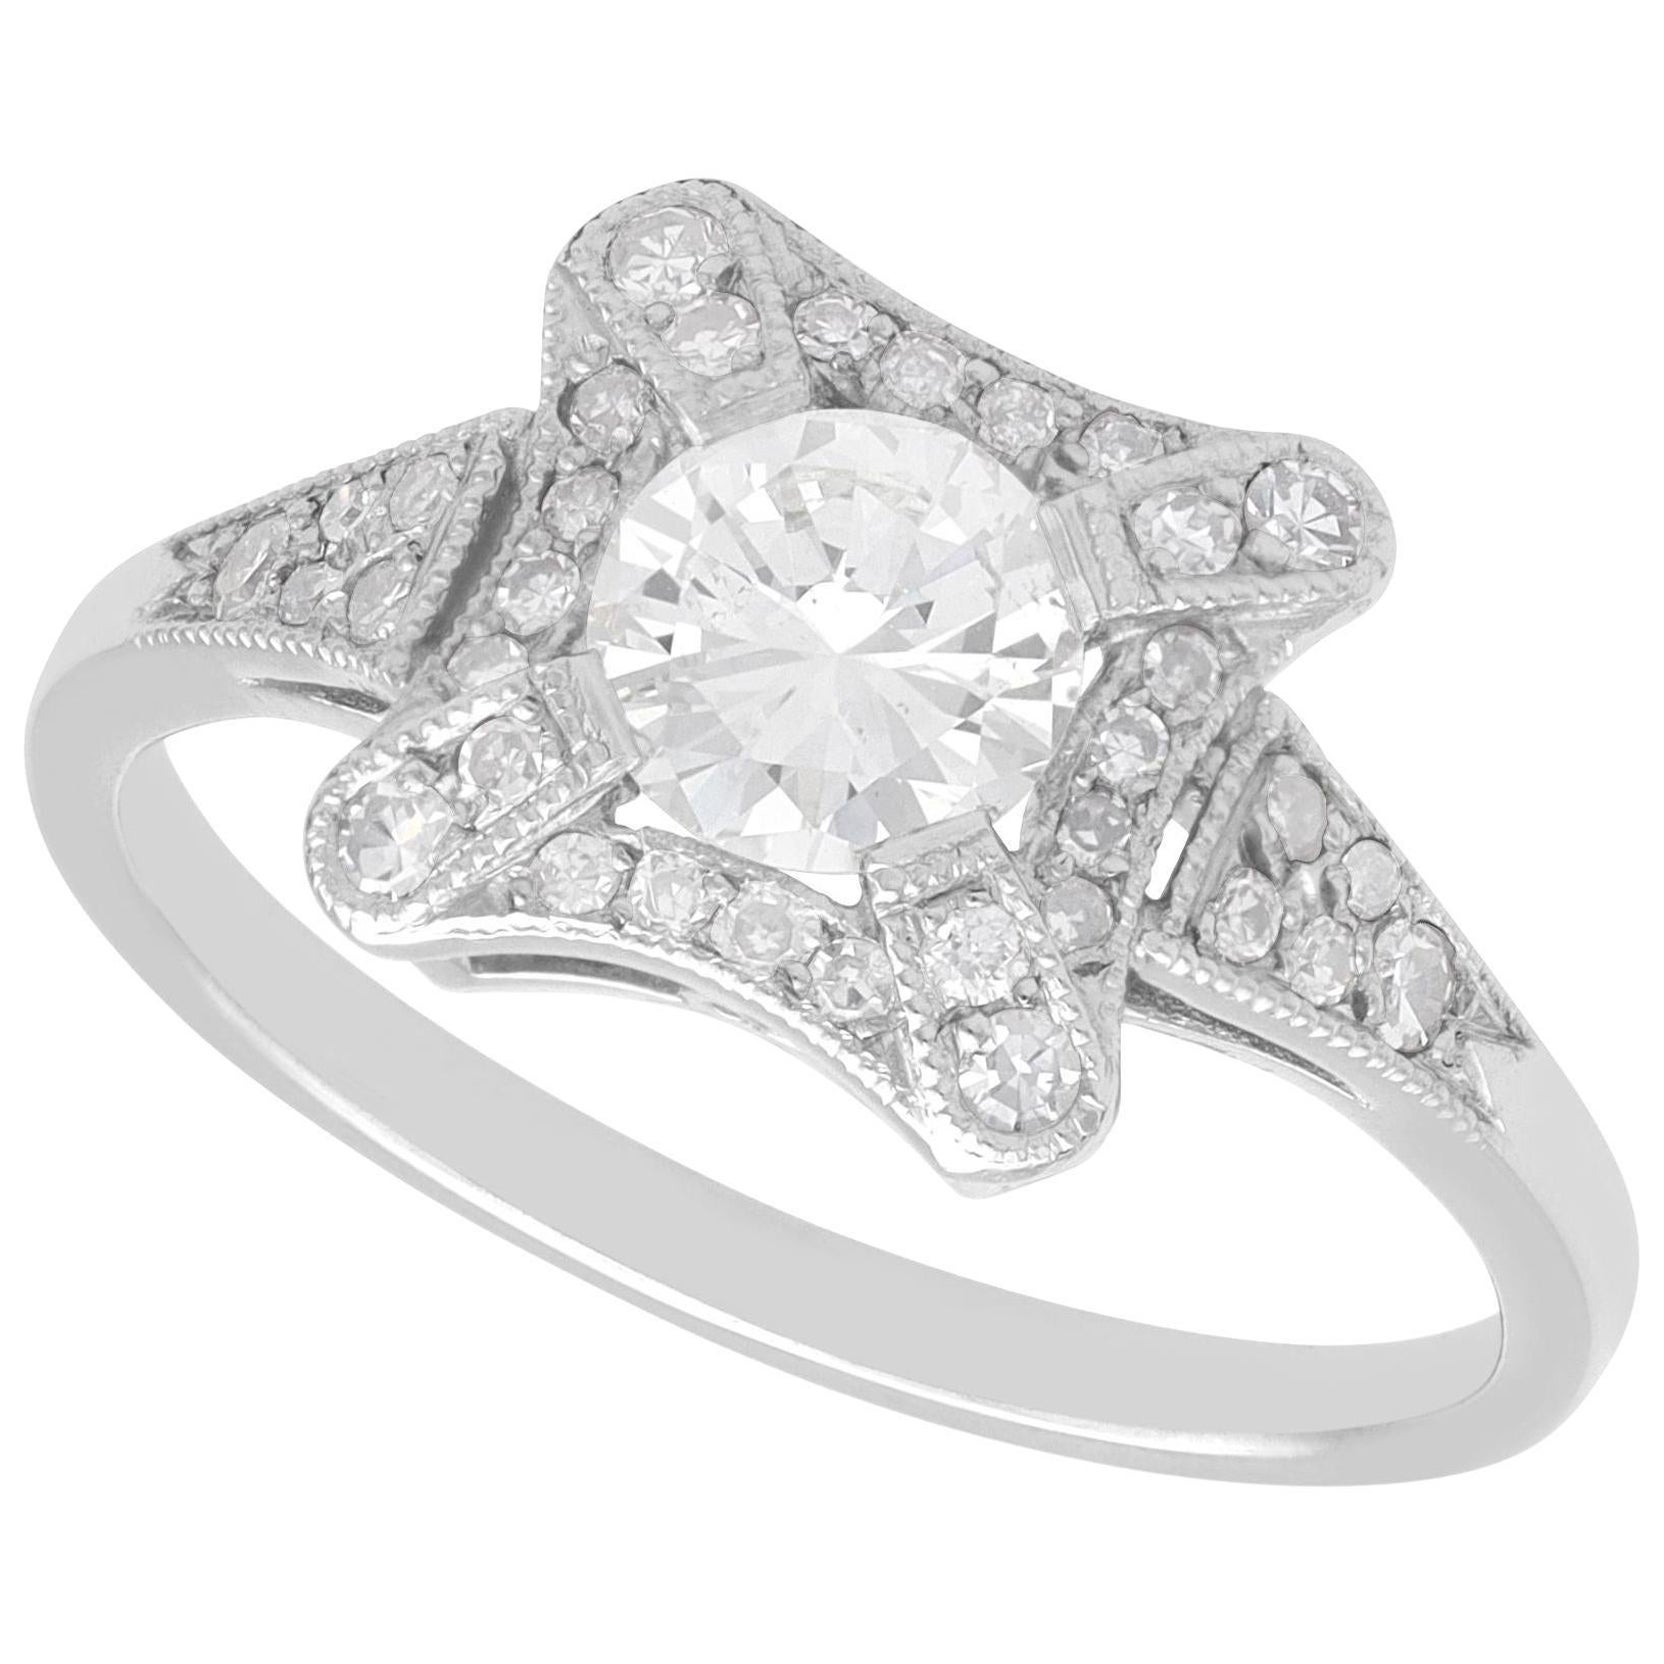 1.01 Carat Diamond and Platinum Cluster Ring For Sale